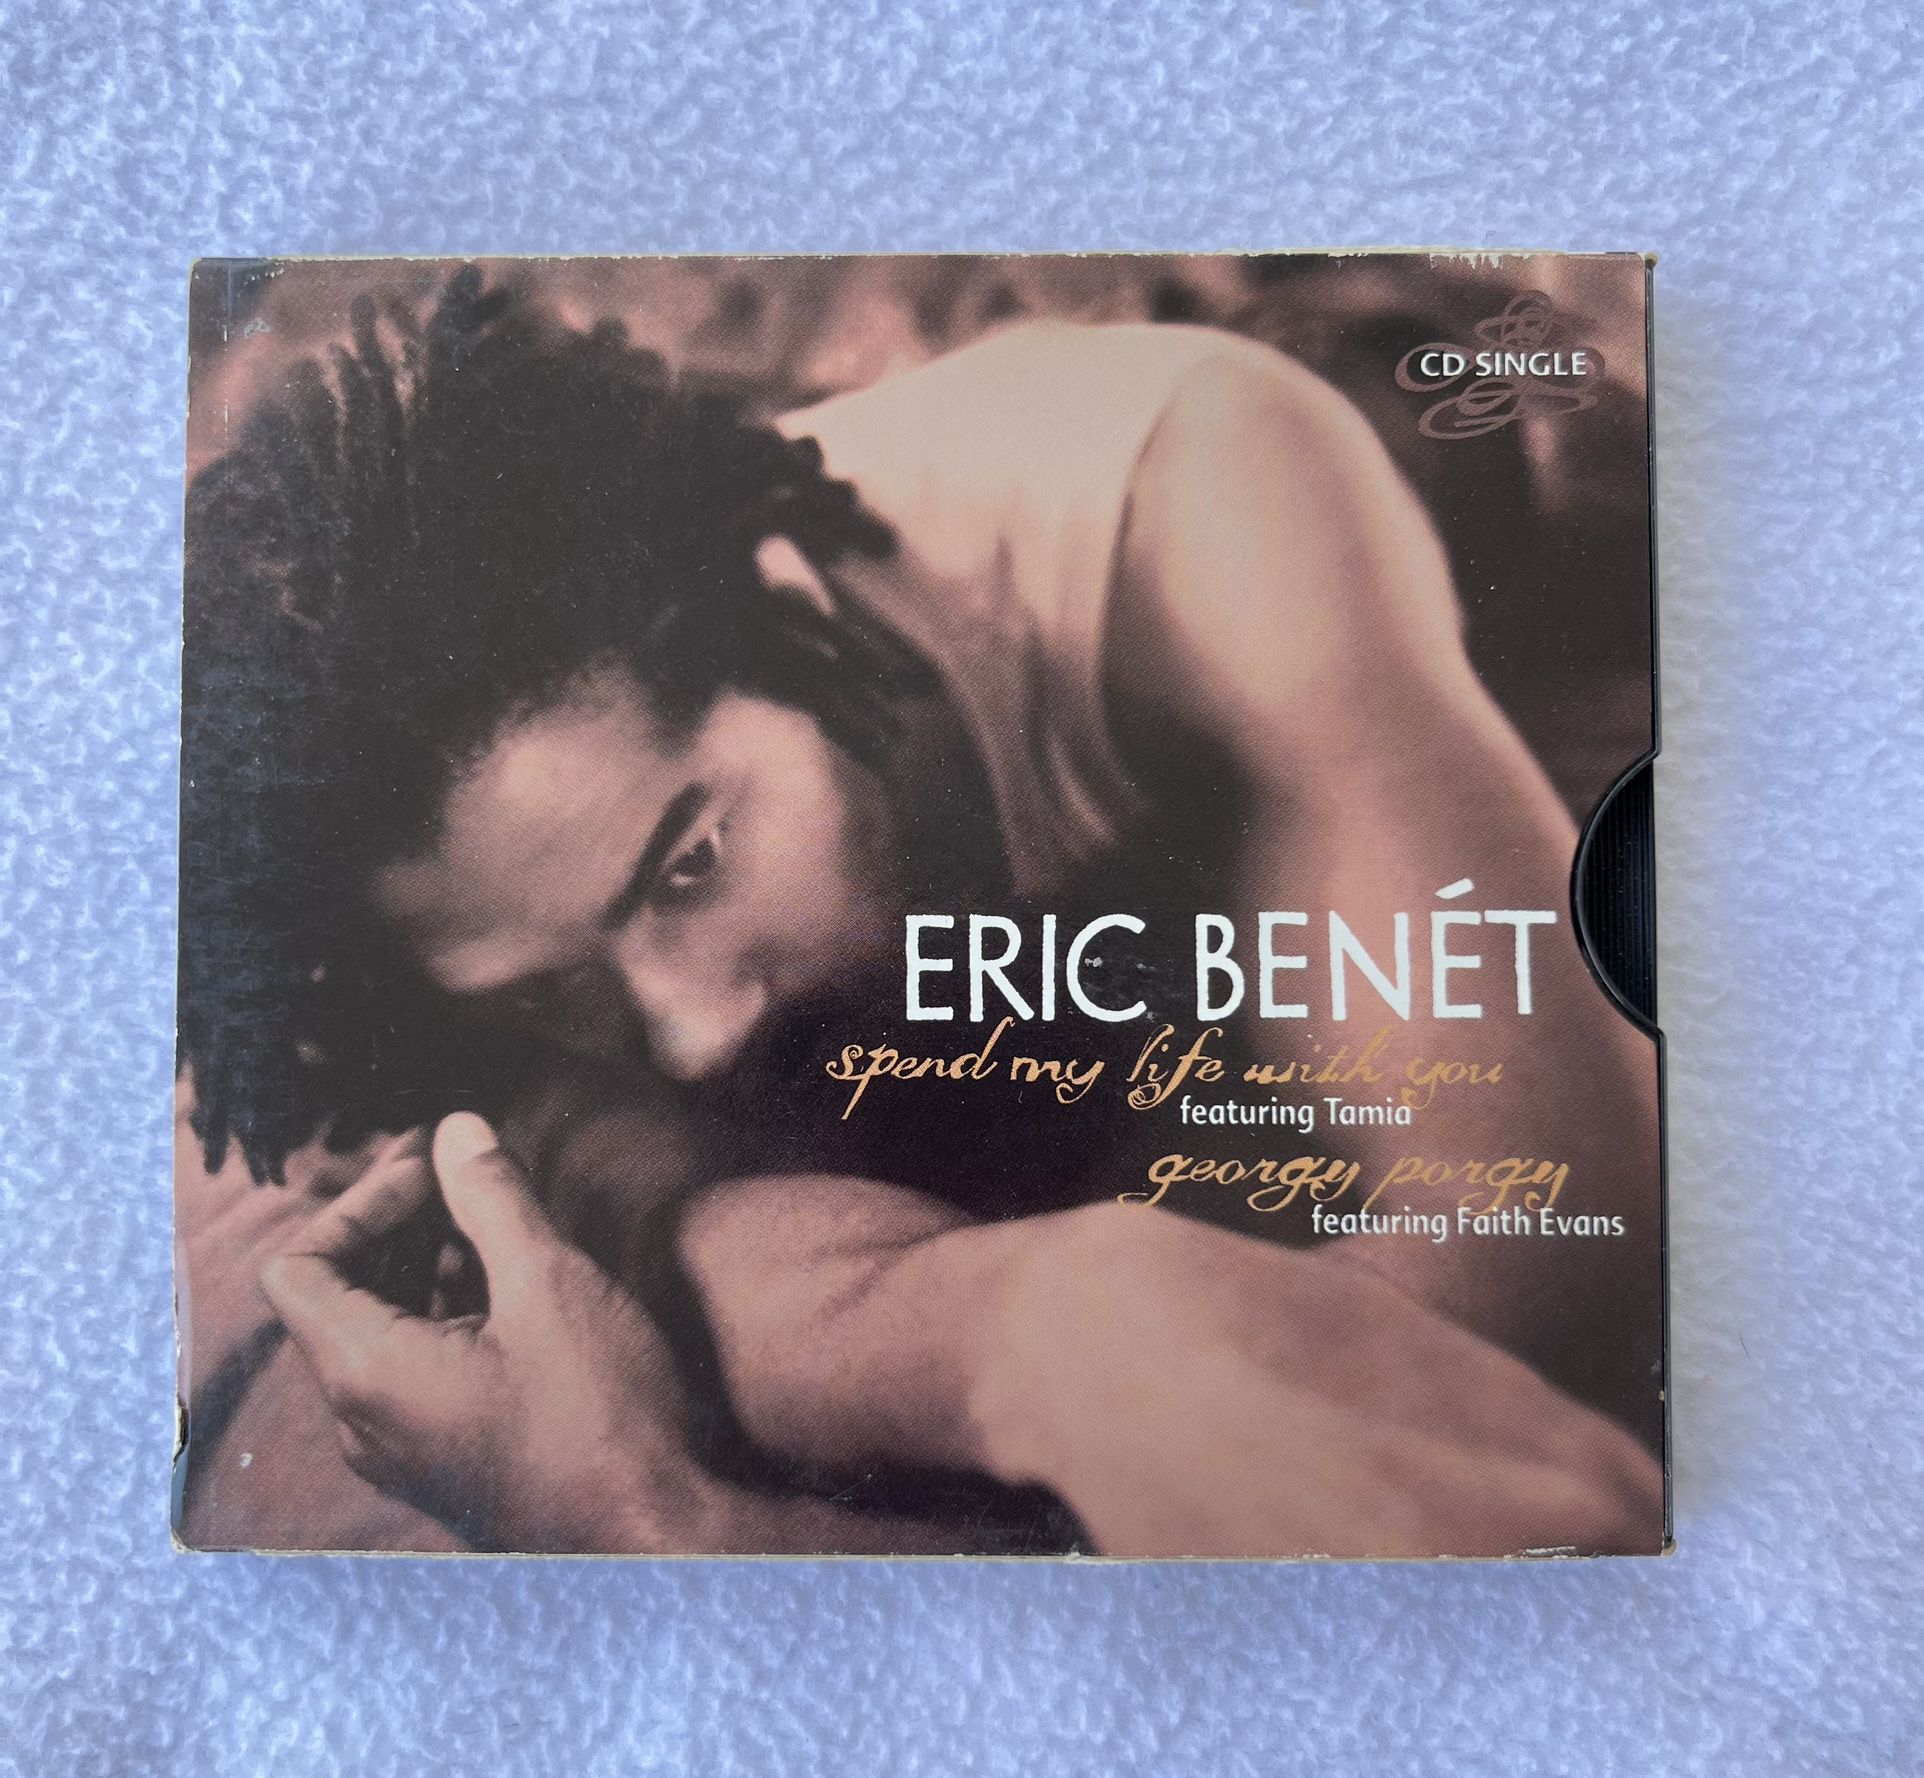 CD Single Eric Benet R&B Spending My Life With You